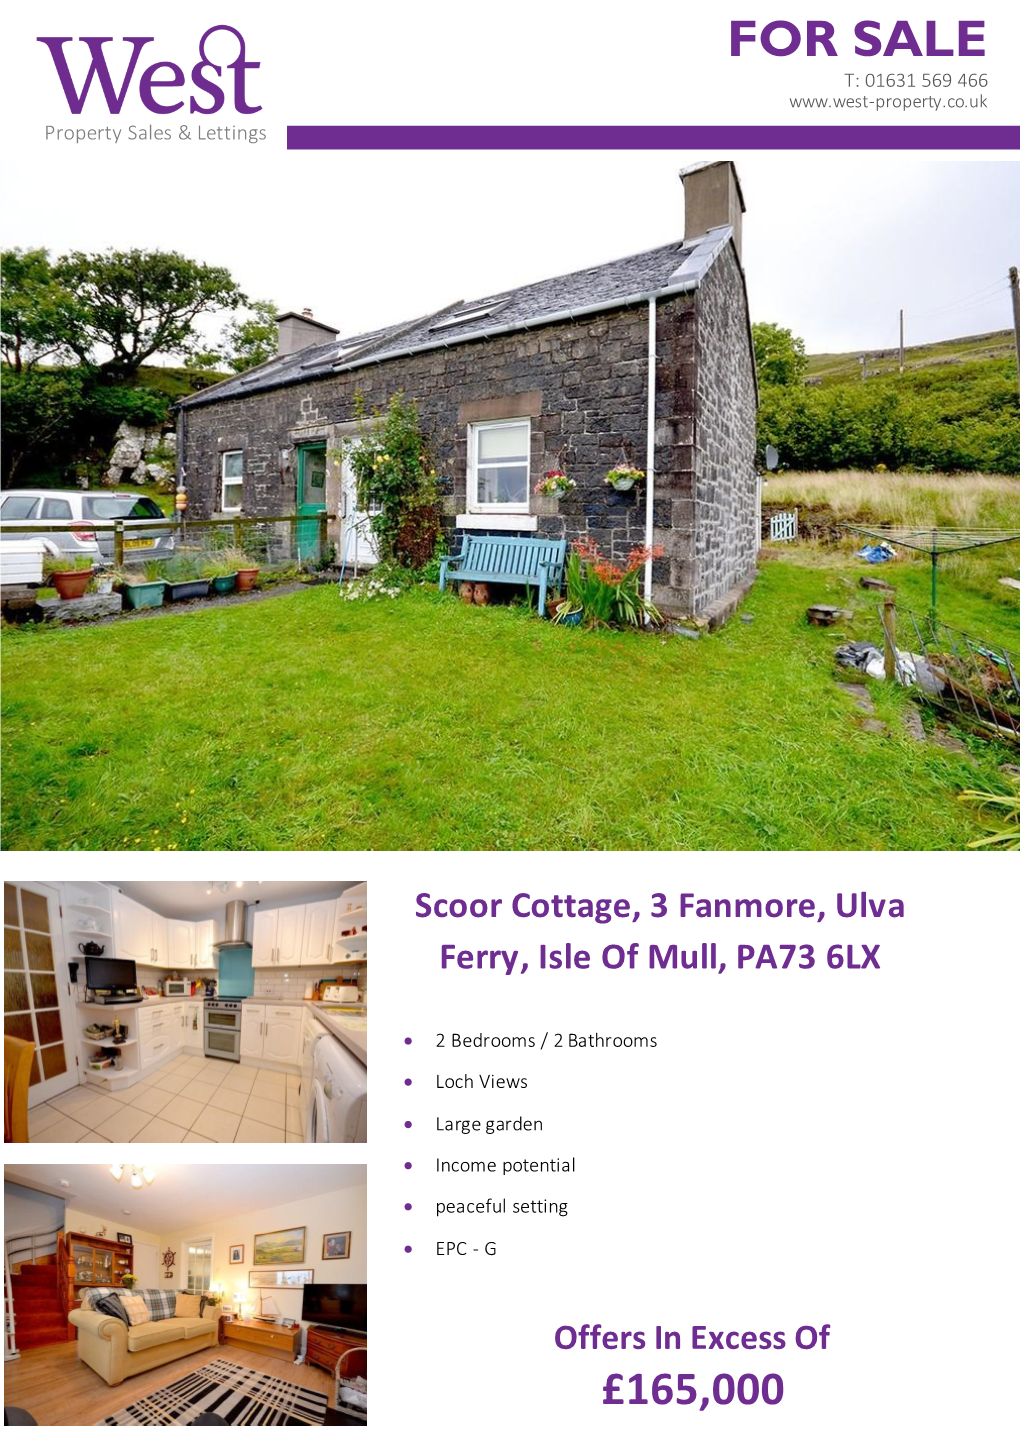 FOR SALE Scoor Cottage, 3 Fanmore, Ulva Ferry, Isle of Mull